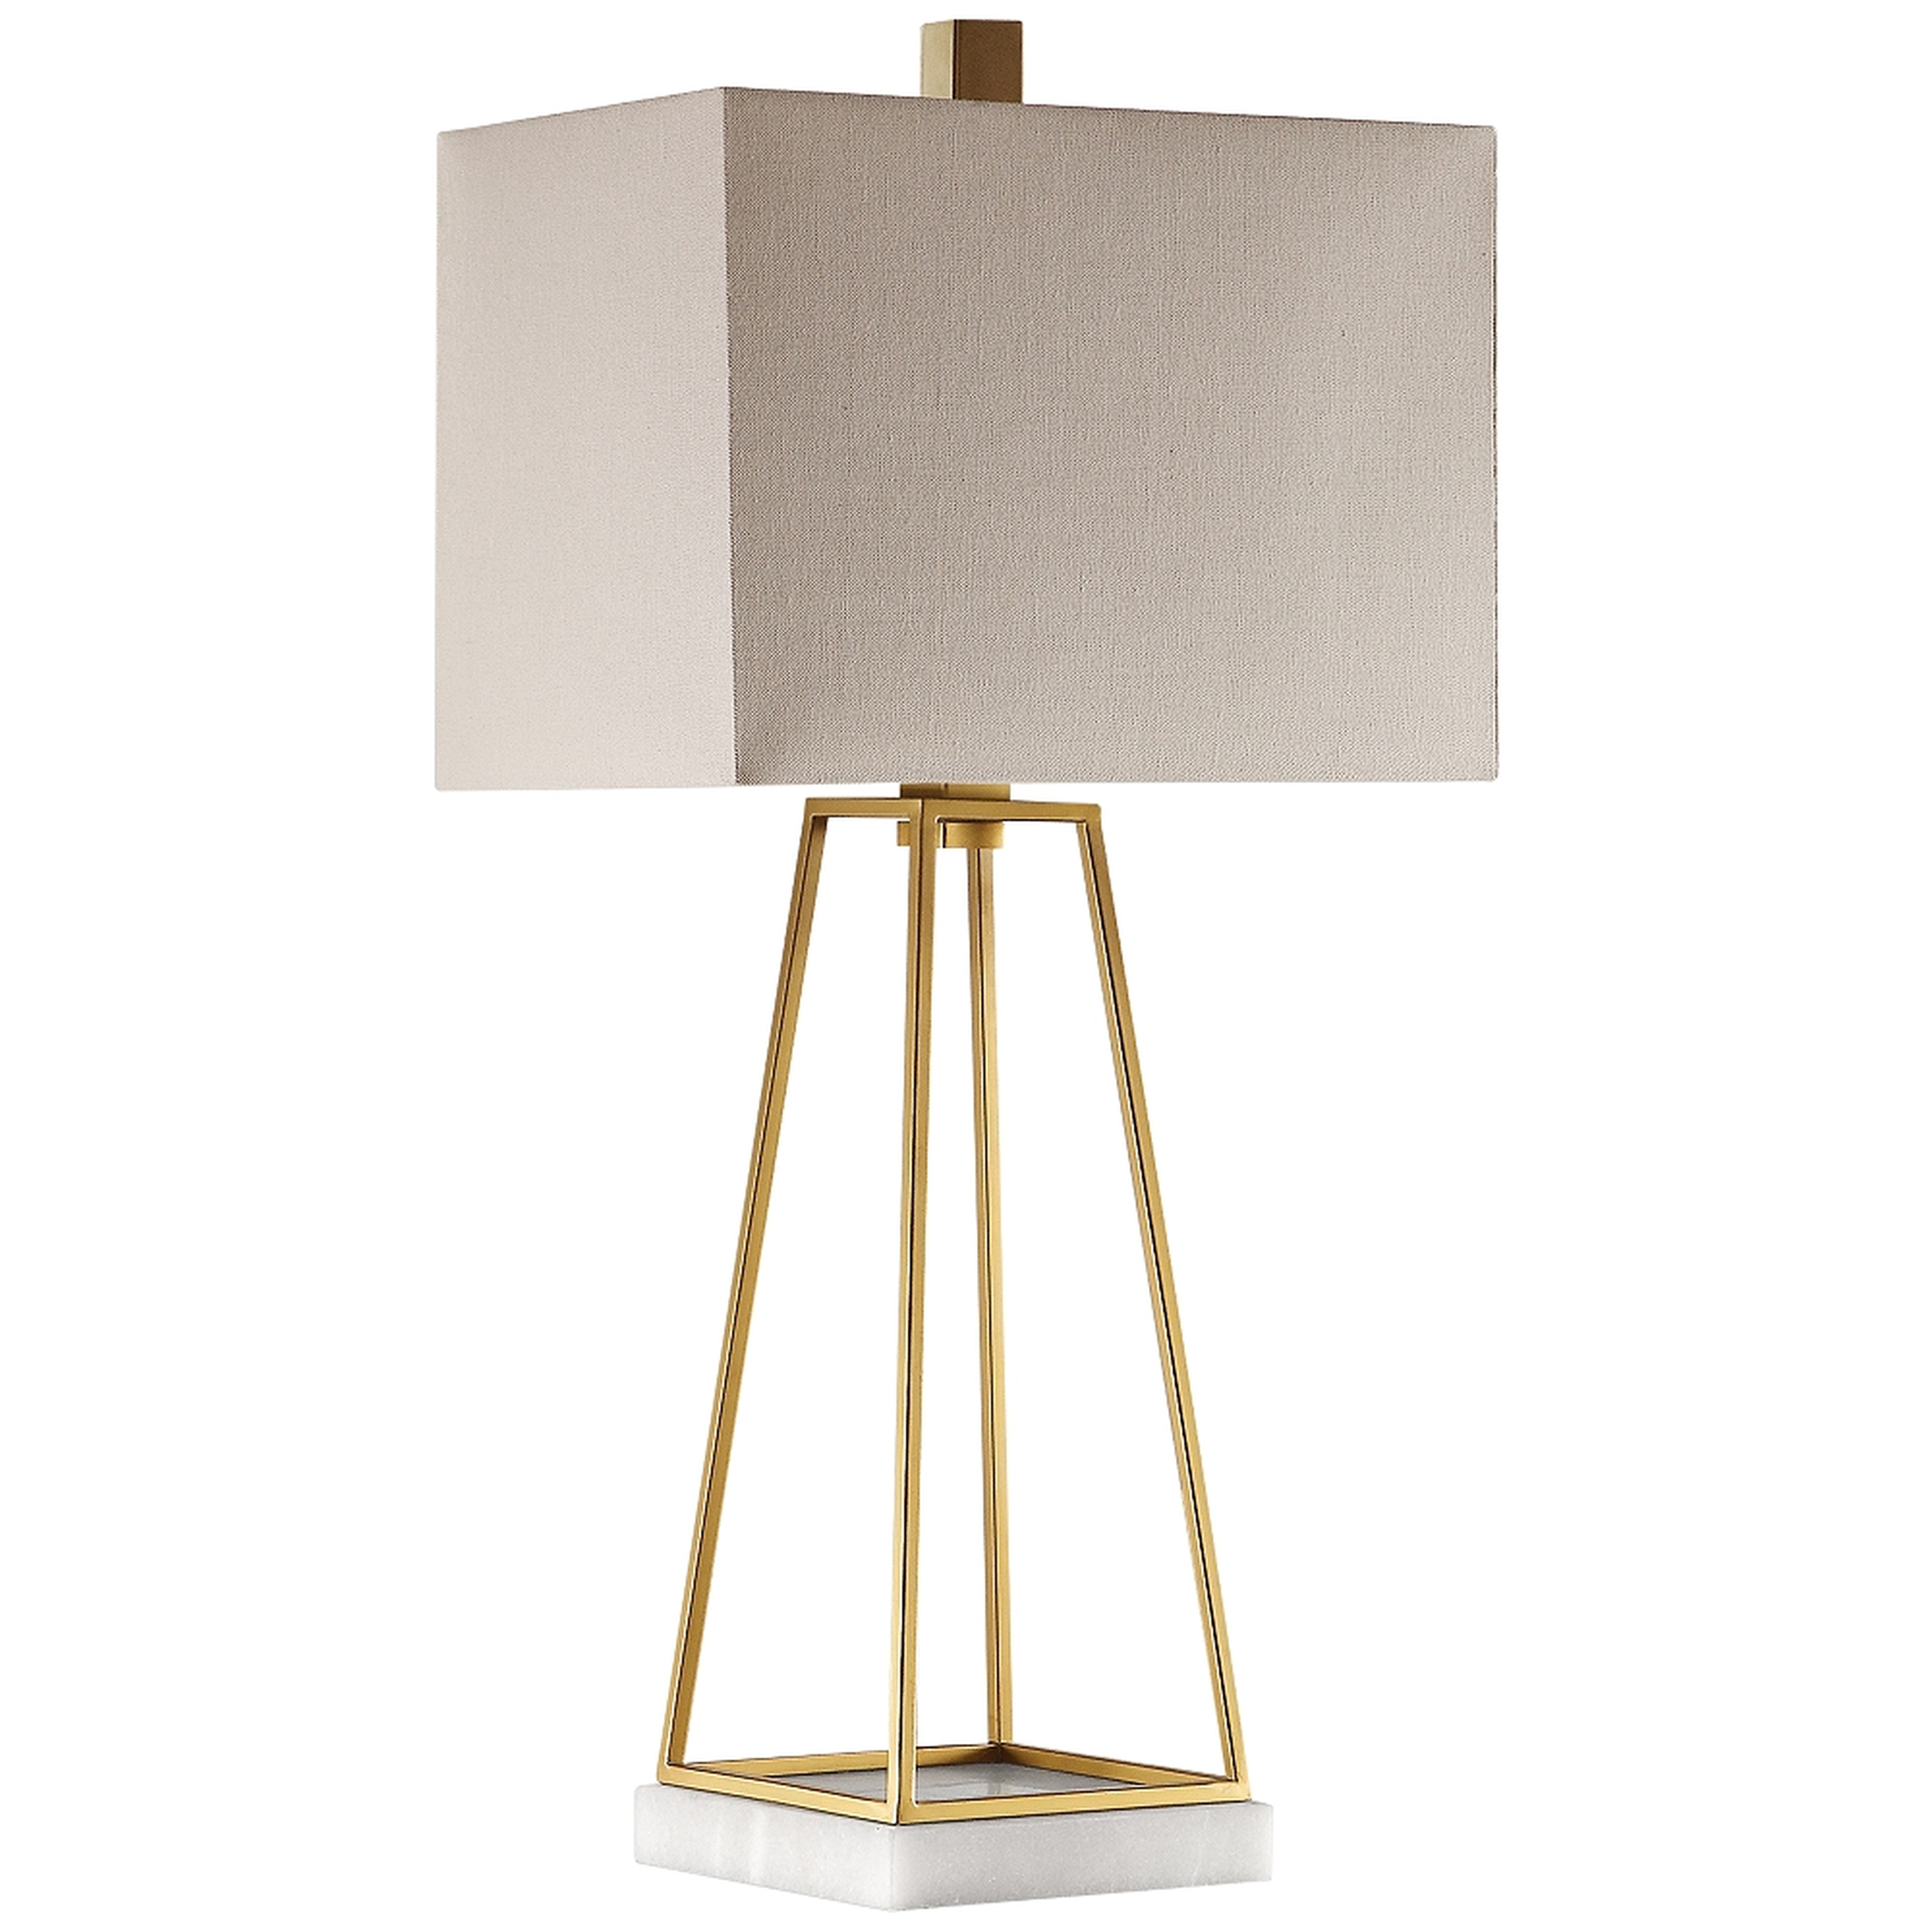 Uttermost Mackean Plated Metallic Gold Table Lamp - Style # 59H50 - Lamps Plus